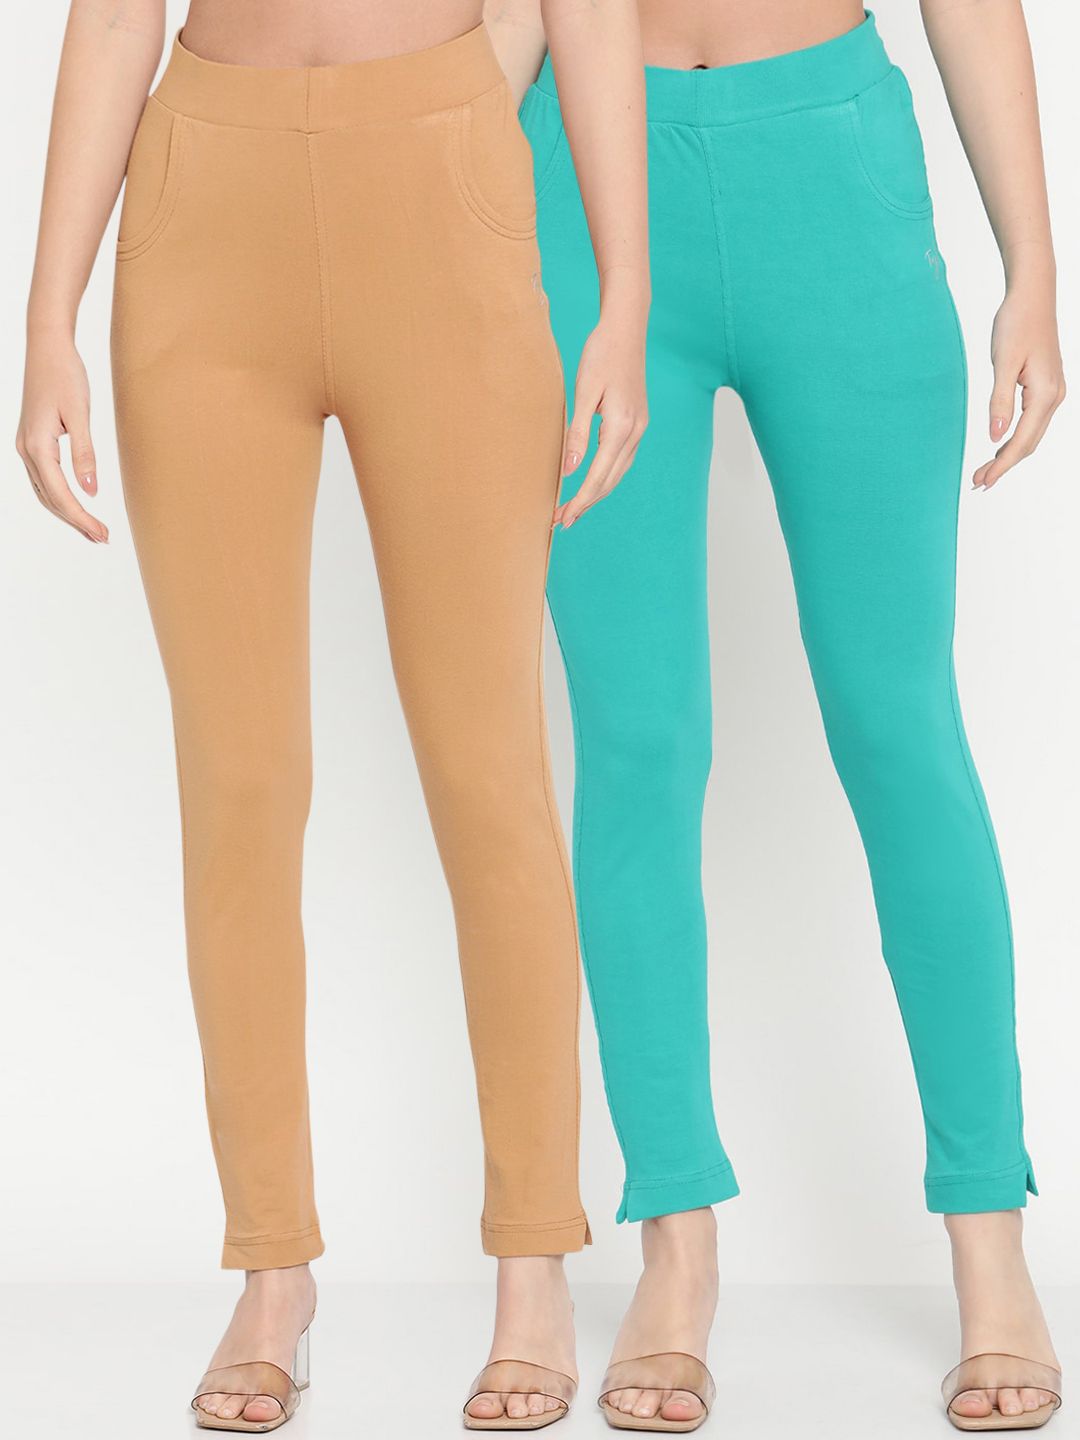 TAG 7 Women Turquoise Blue & Beige Ankle-Length Leggings Pack of 2 Price in India